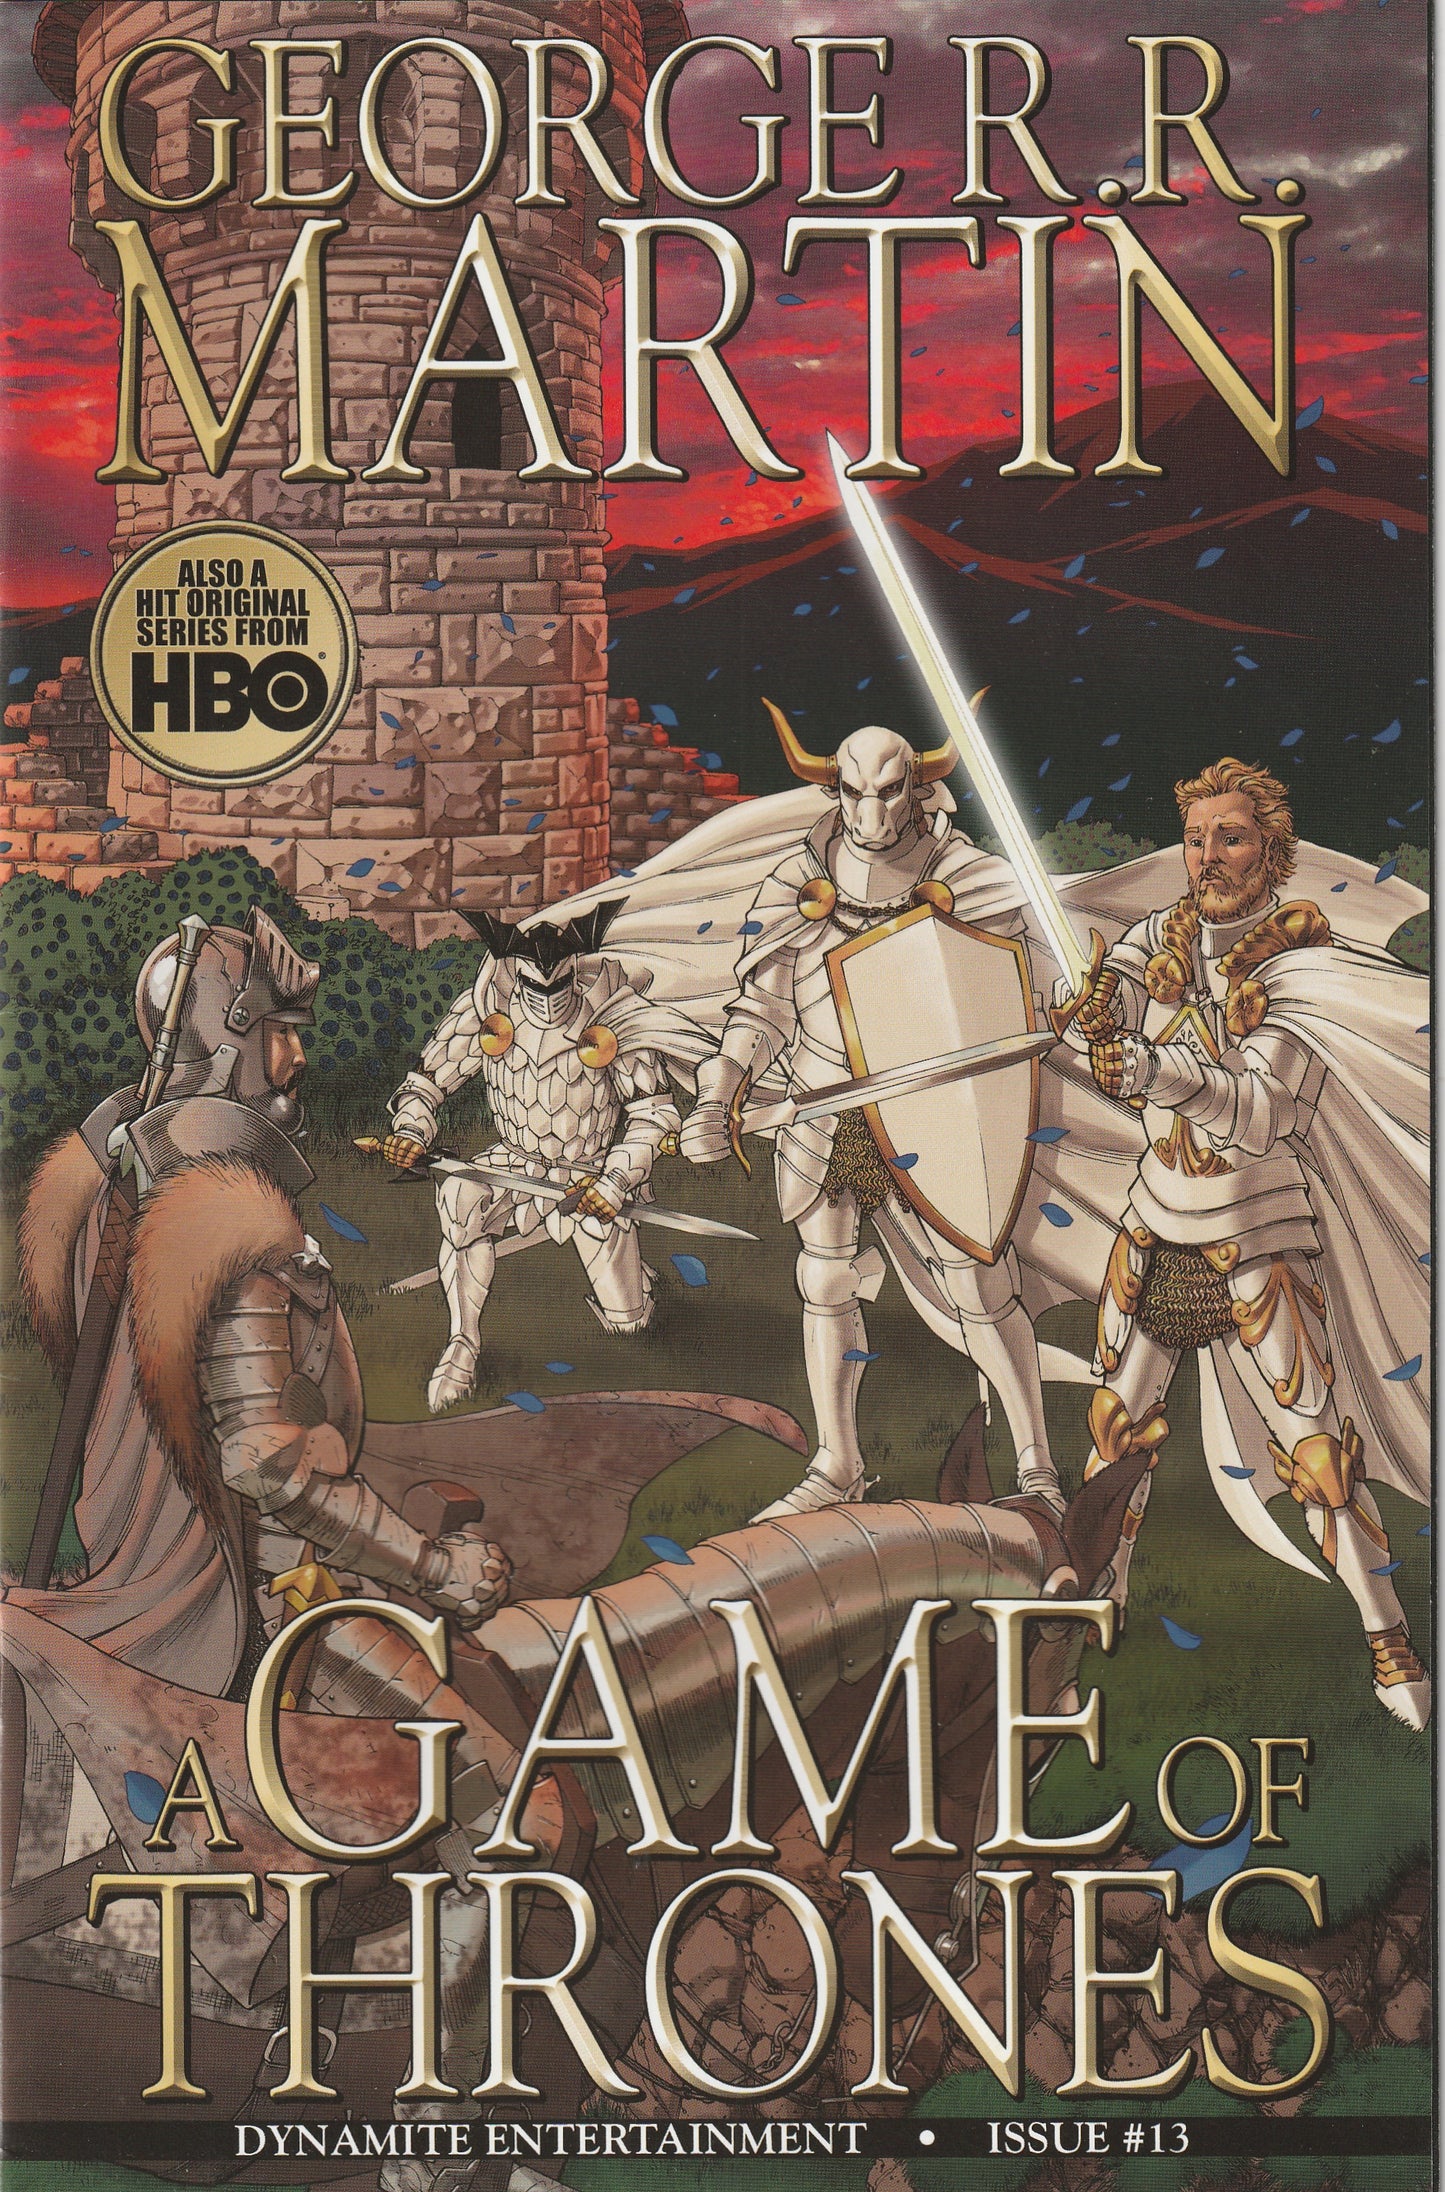 A Game of Thrones #13 (2013) - George R.R. Martin